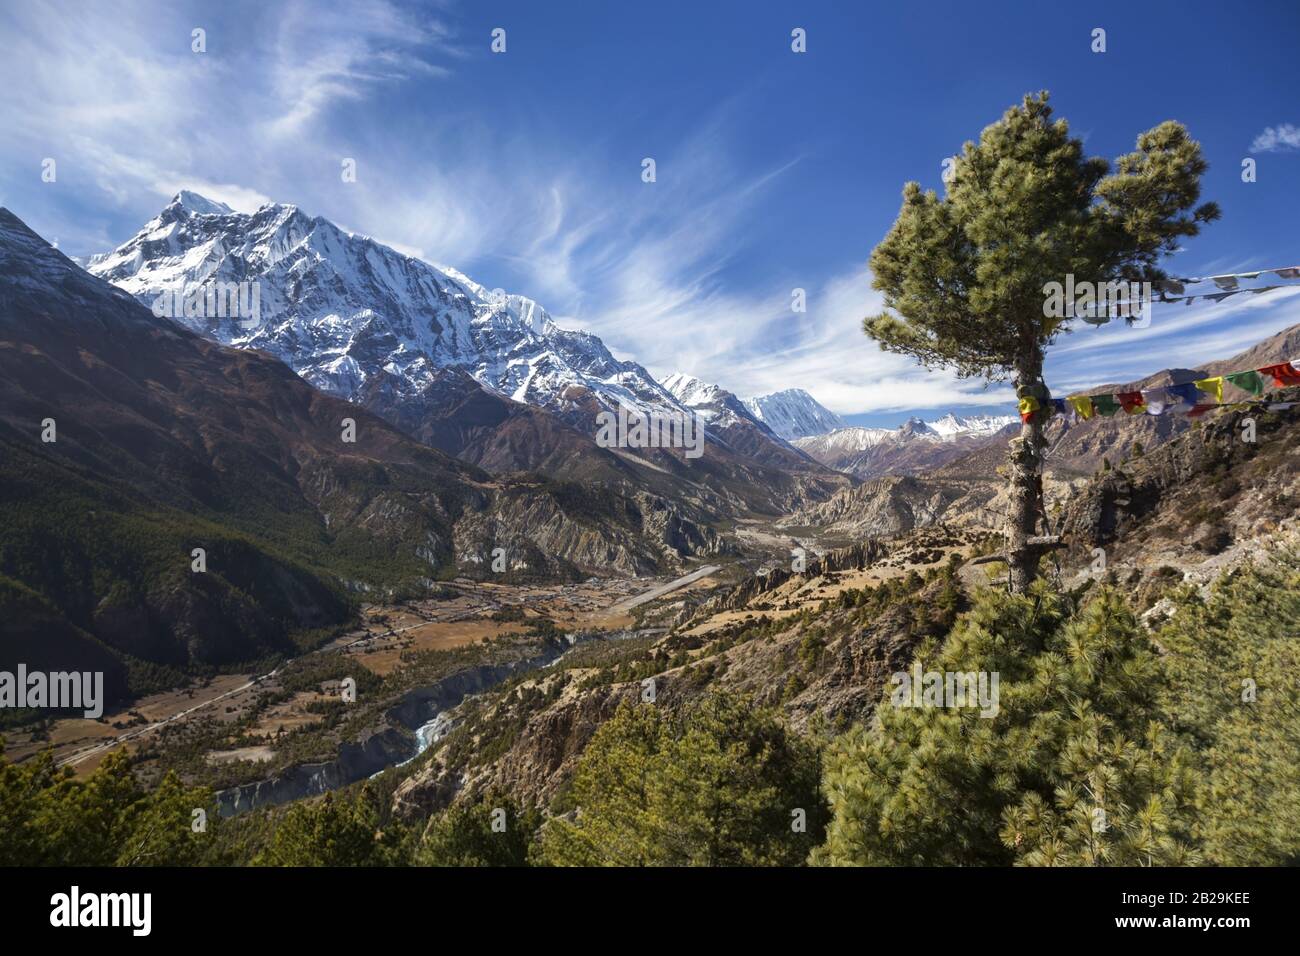 Annapurna Mountain Peak Range Landscape View from trekking route between Pisang and Manang Villages in Nepal Himalaya Mountains Stock Photo